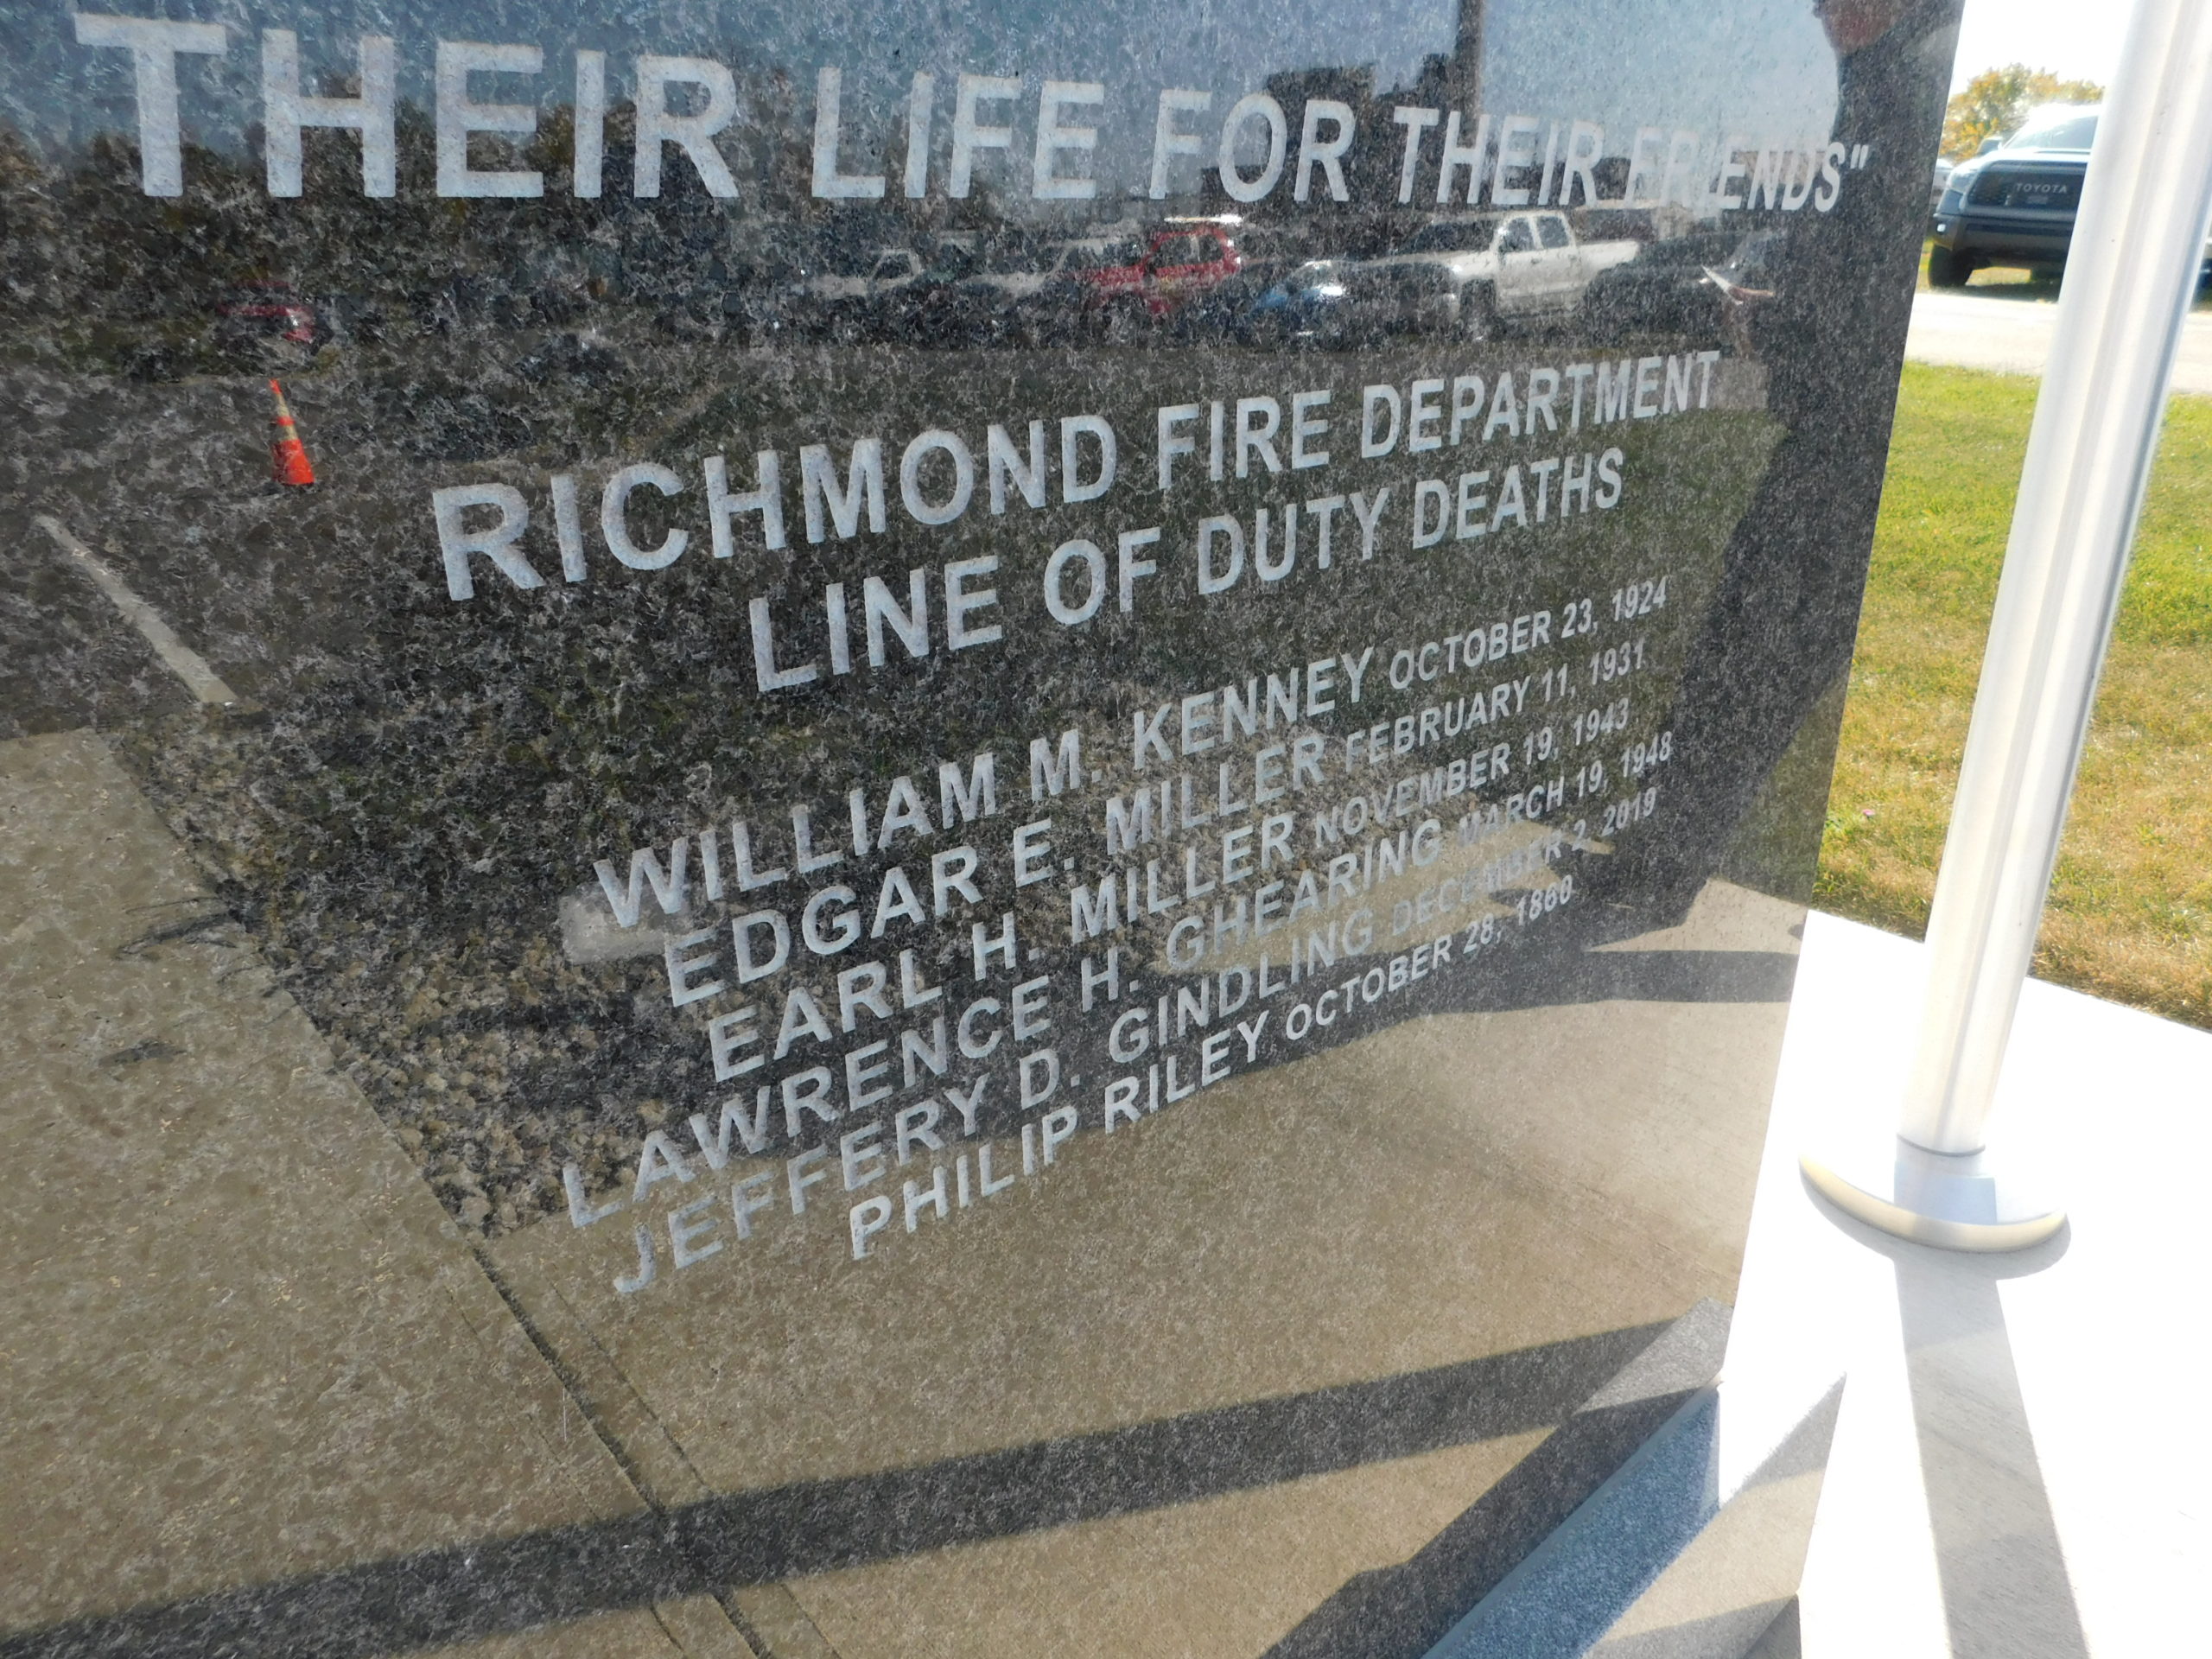 Photo of a memorial marker